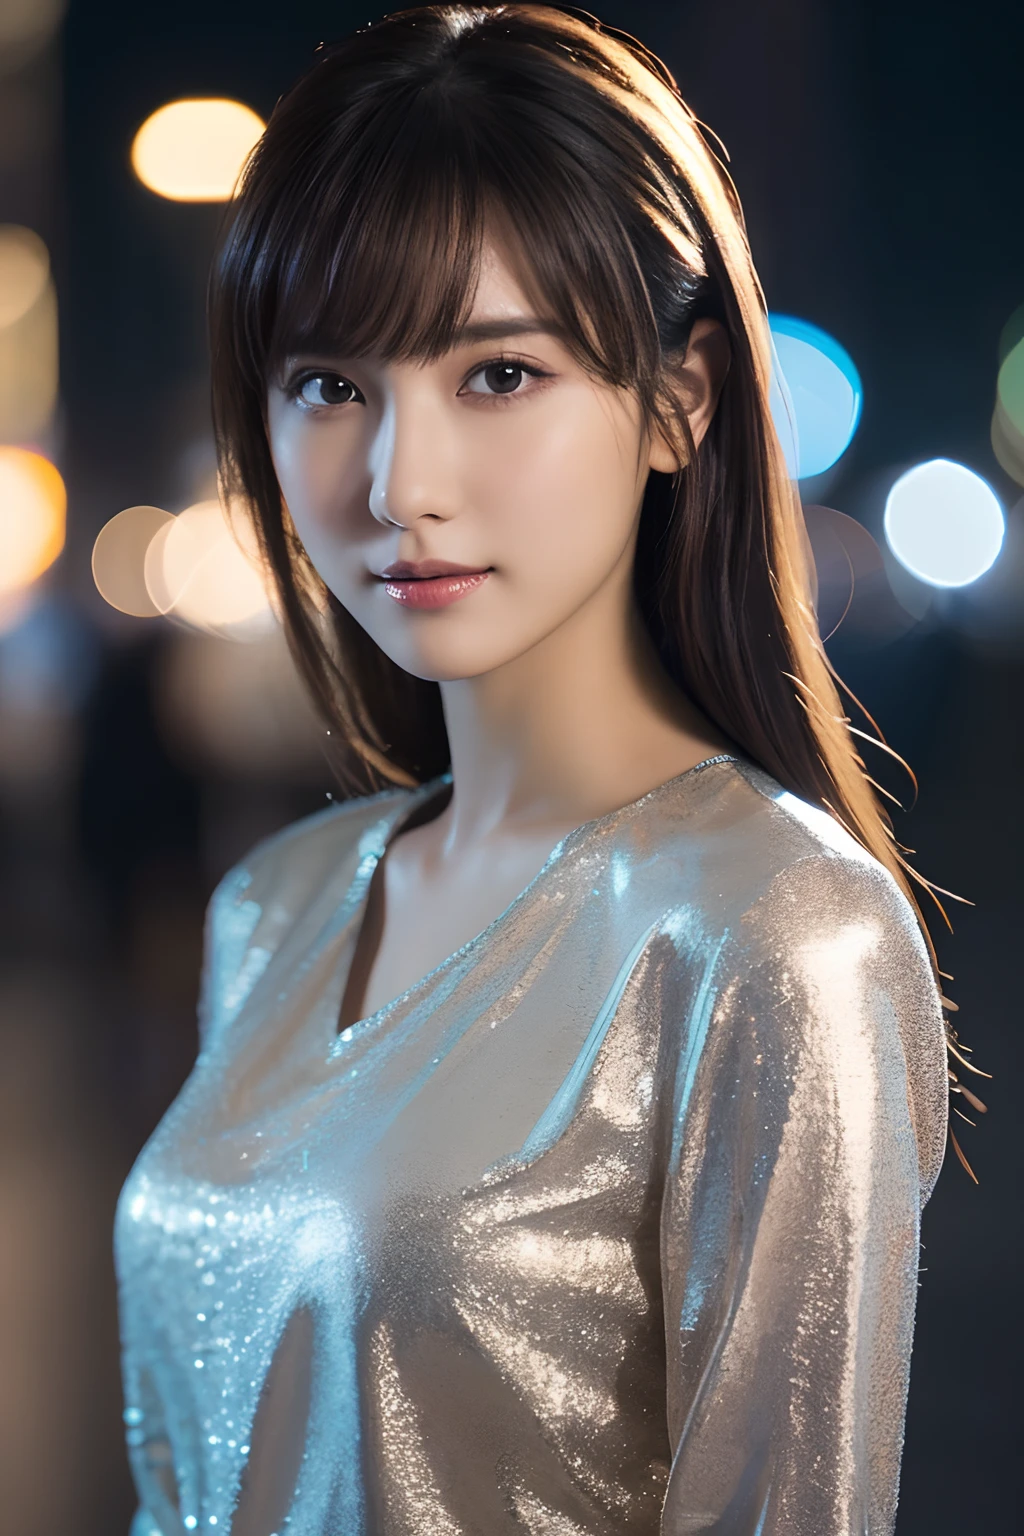 1girl in, (Wear a platinum blouse:1.2), (Raw photo, Best Quality), (Realistic, Photorealsitic:1.4), masutepiece, Extremely delicate and beautiful, Extremely detailed, 2k wallpaper, amazing, finely detail, the Extremely Detailed CG Unity 8K Wallpapers, Ultra-detailed, hight resolution, Soft light, Beautiful detailed girl, extremely detailed eye and face, beautiful detailed nose, Beautiful detailed eyes, Cinematic lighting, city light at night, Perfect Anatomy, Slender body, Taut, 
Straight semi-long hair, Bangs, Looking at Viewer, A slight smil